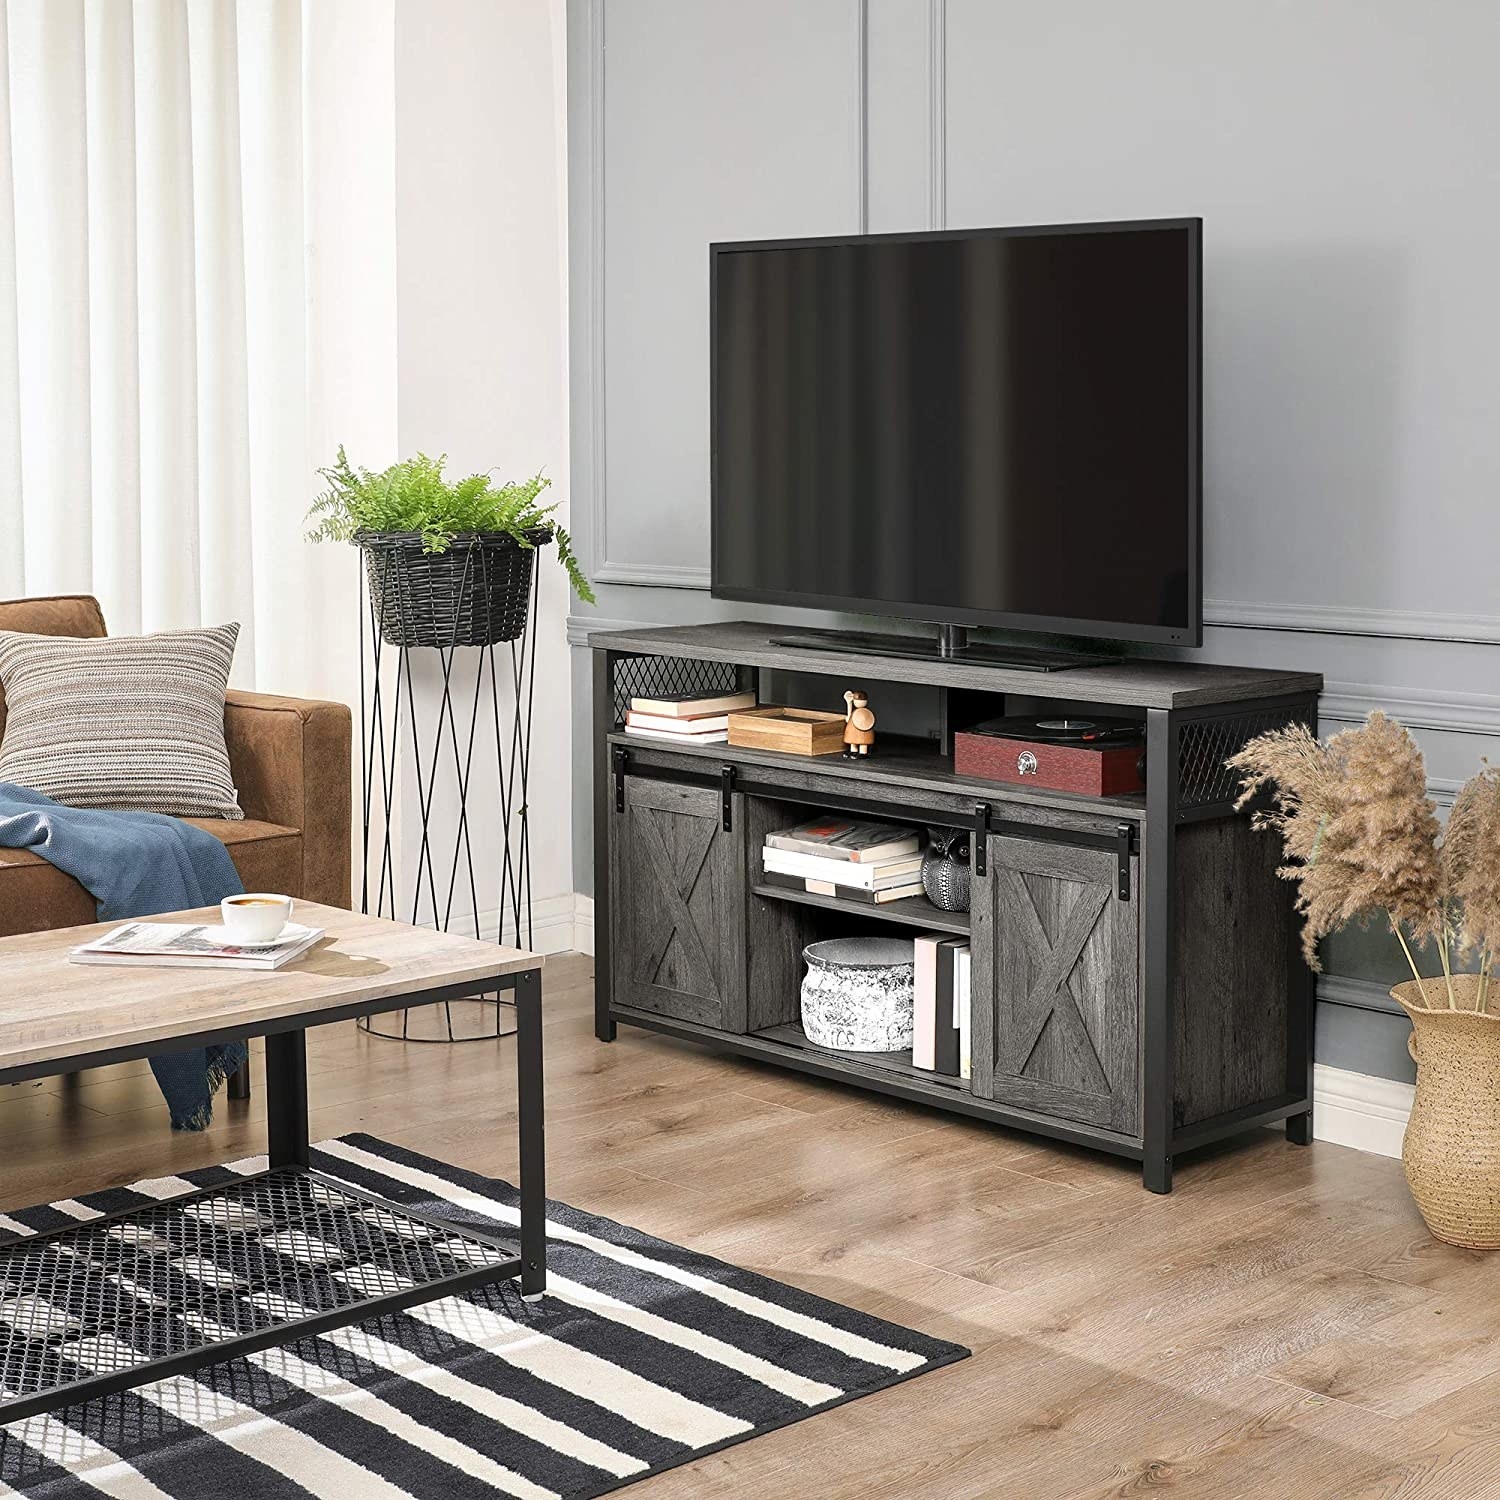 the TV unit with books and decor in it